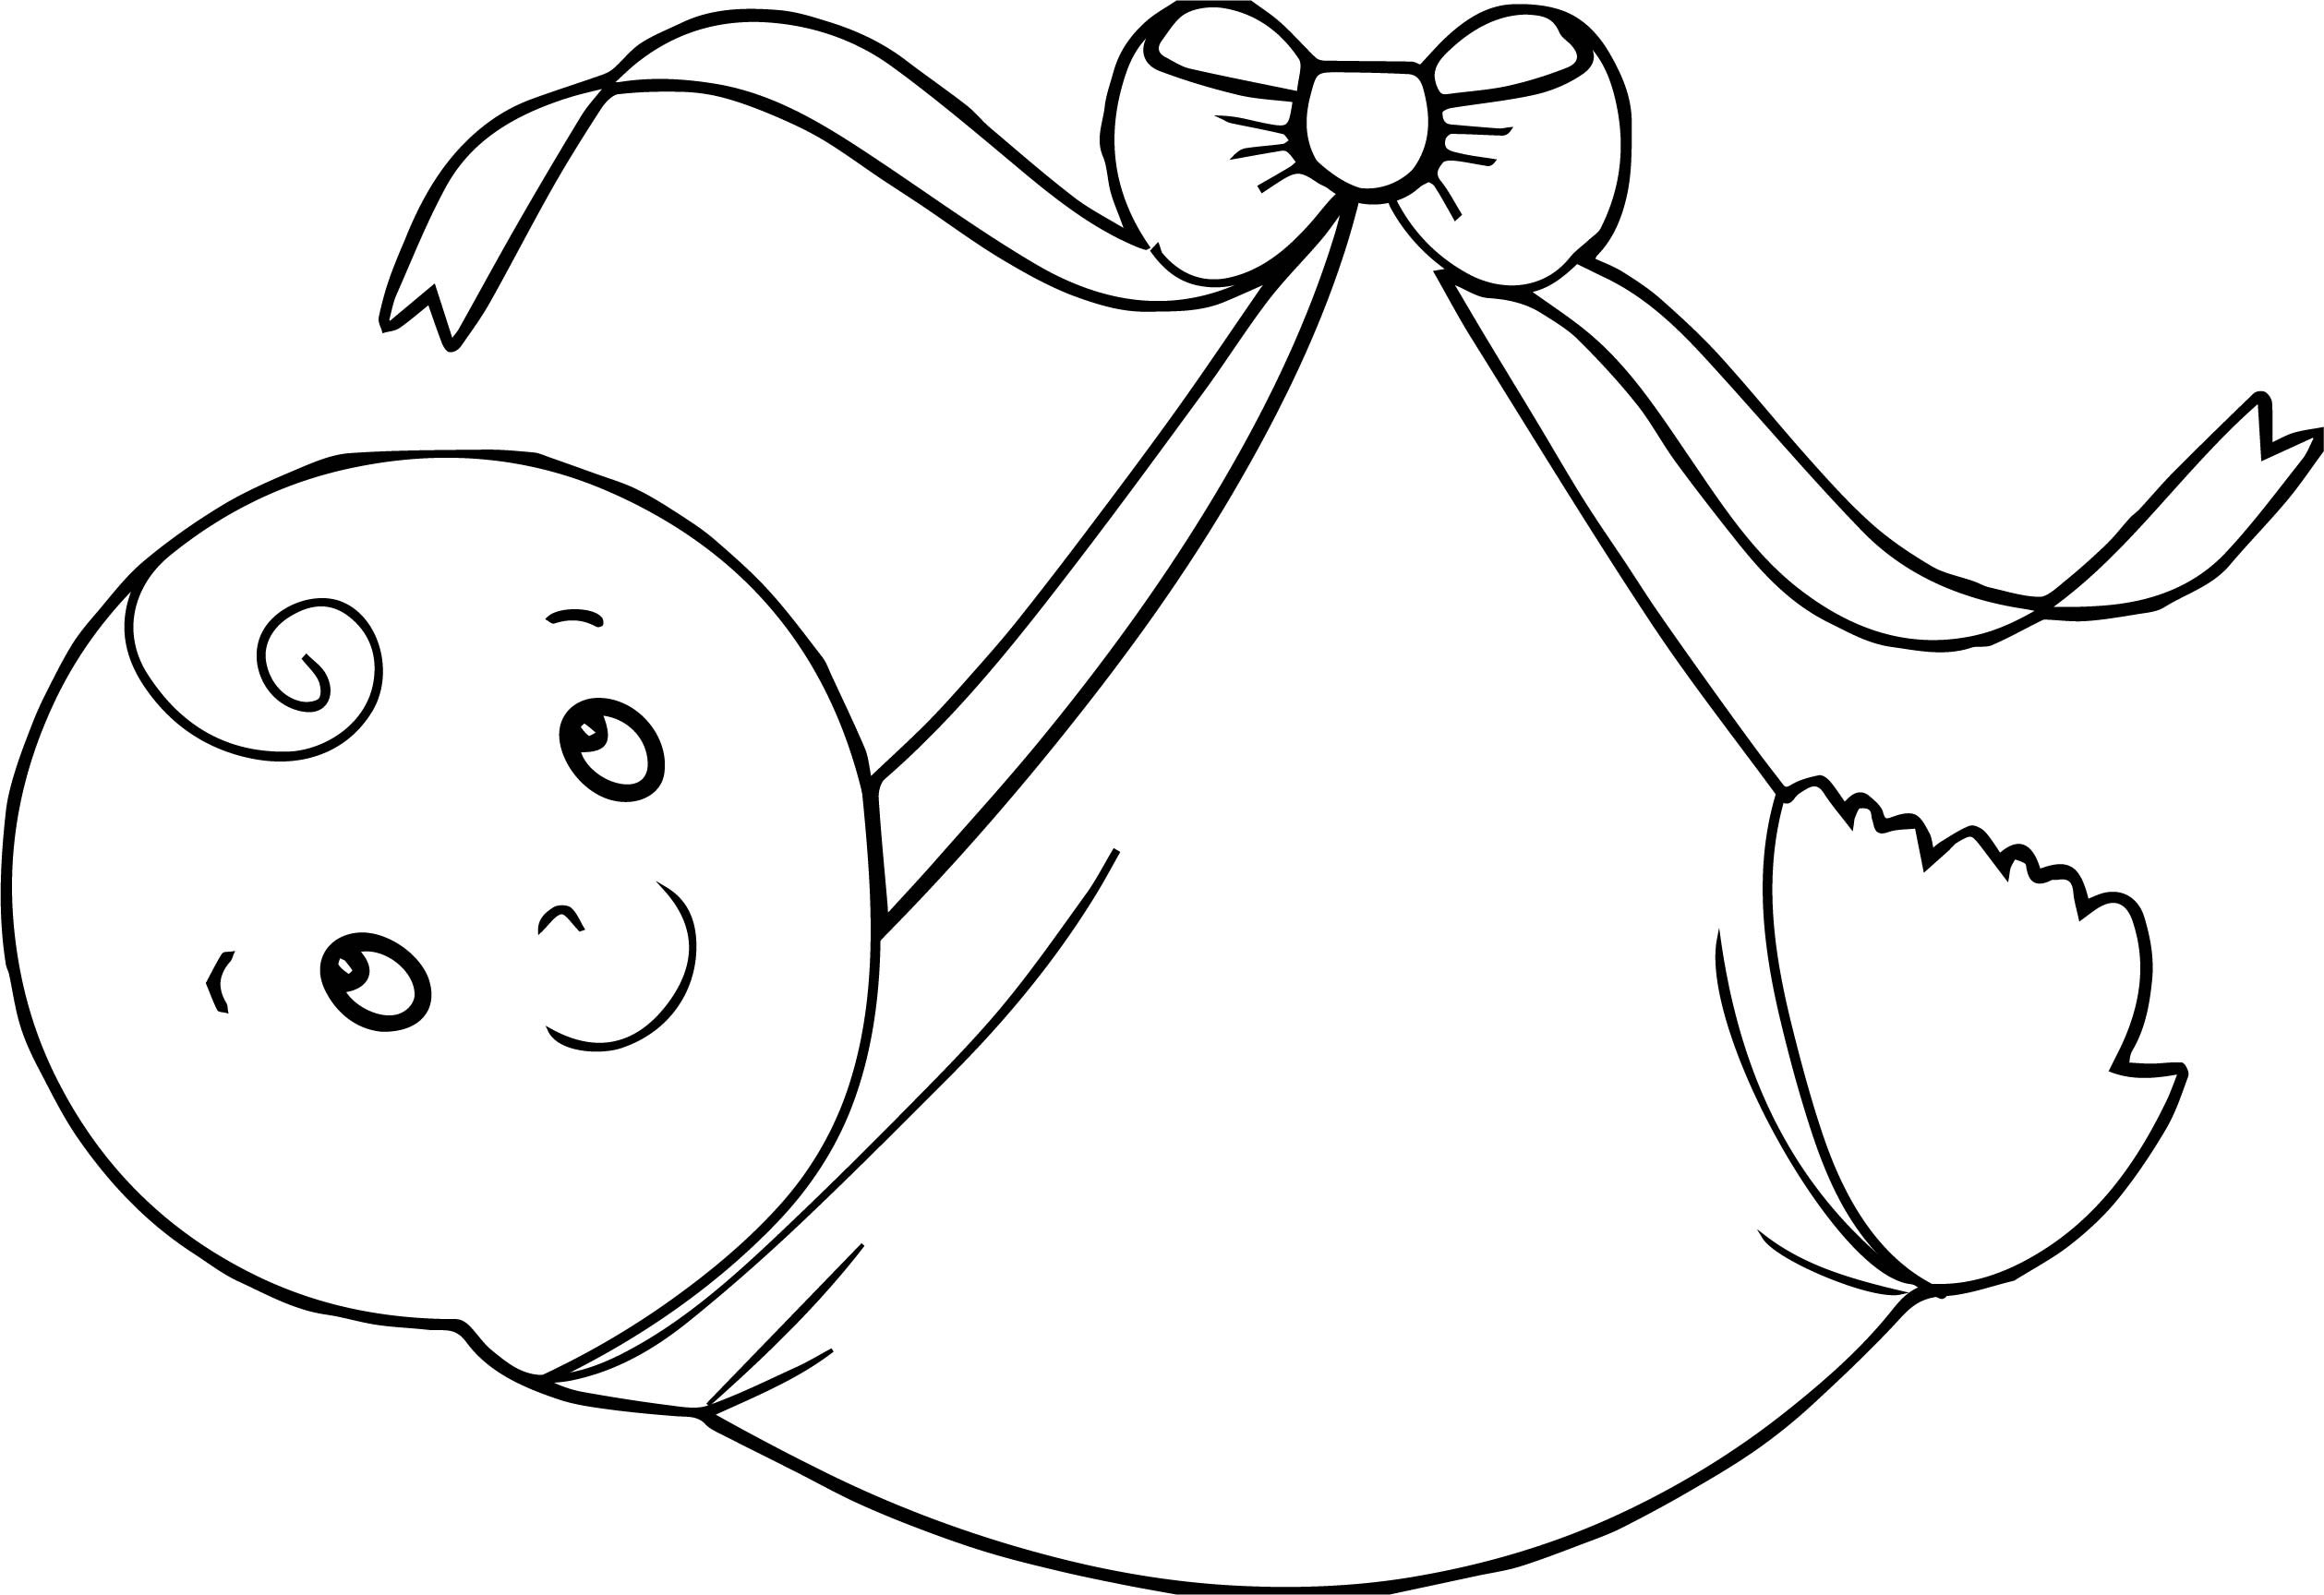 Baby Boy Coloring Pages
 Swaddling Clothes Baby Boy Coloring Page